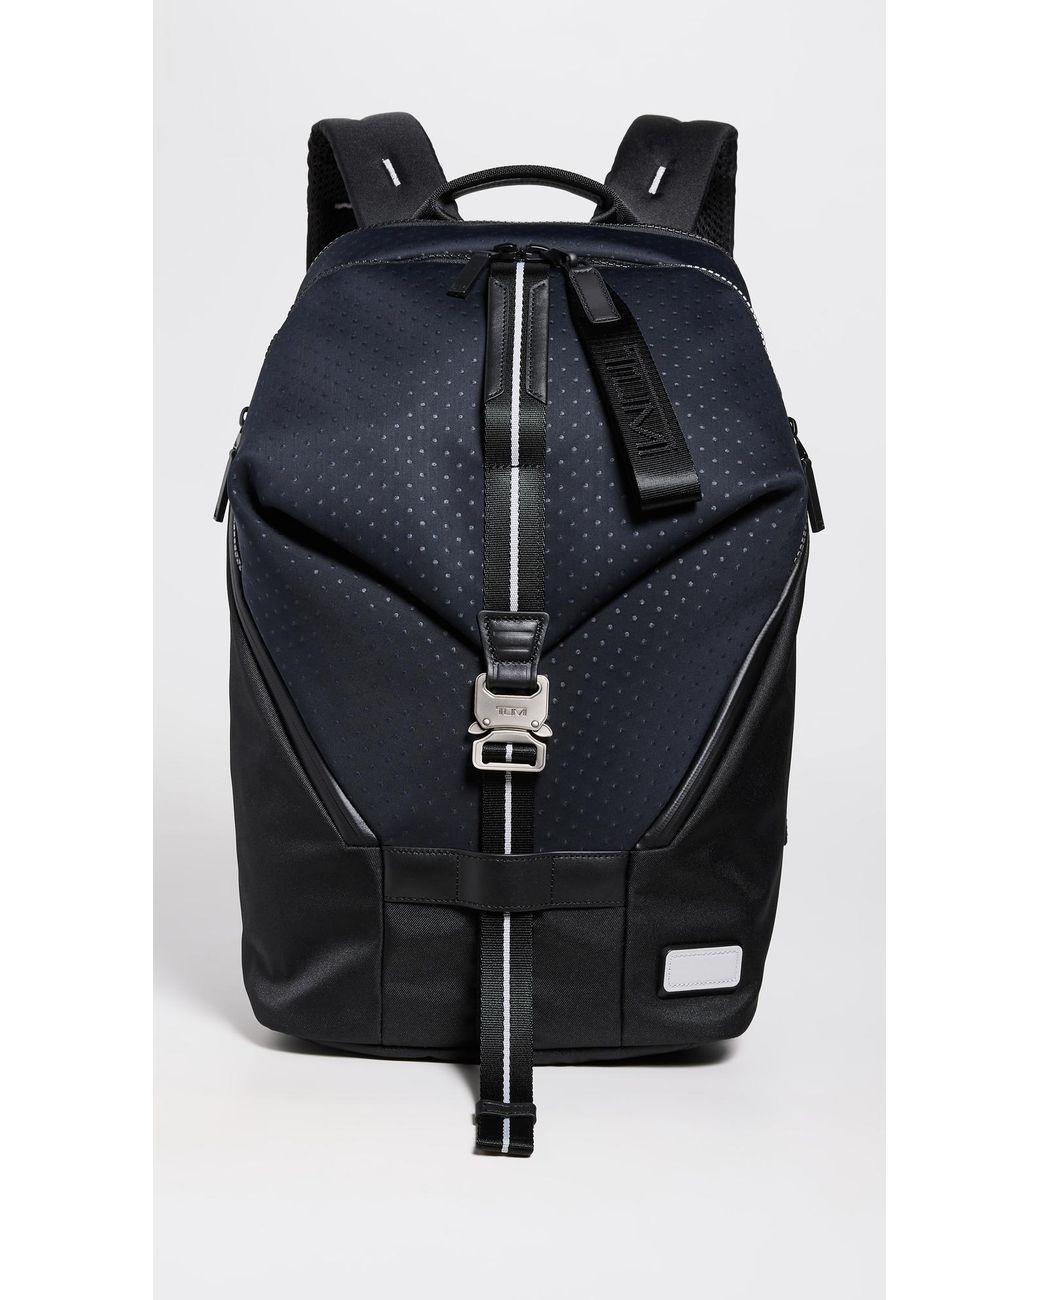 The Tumi Finch: Style and Substance in One Backpack - Luggage Unpacked